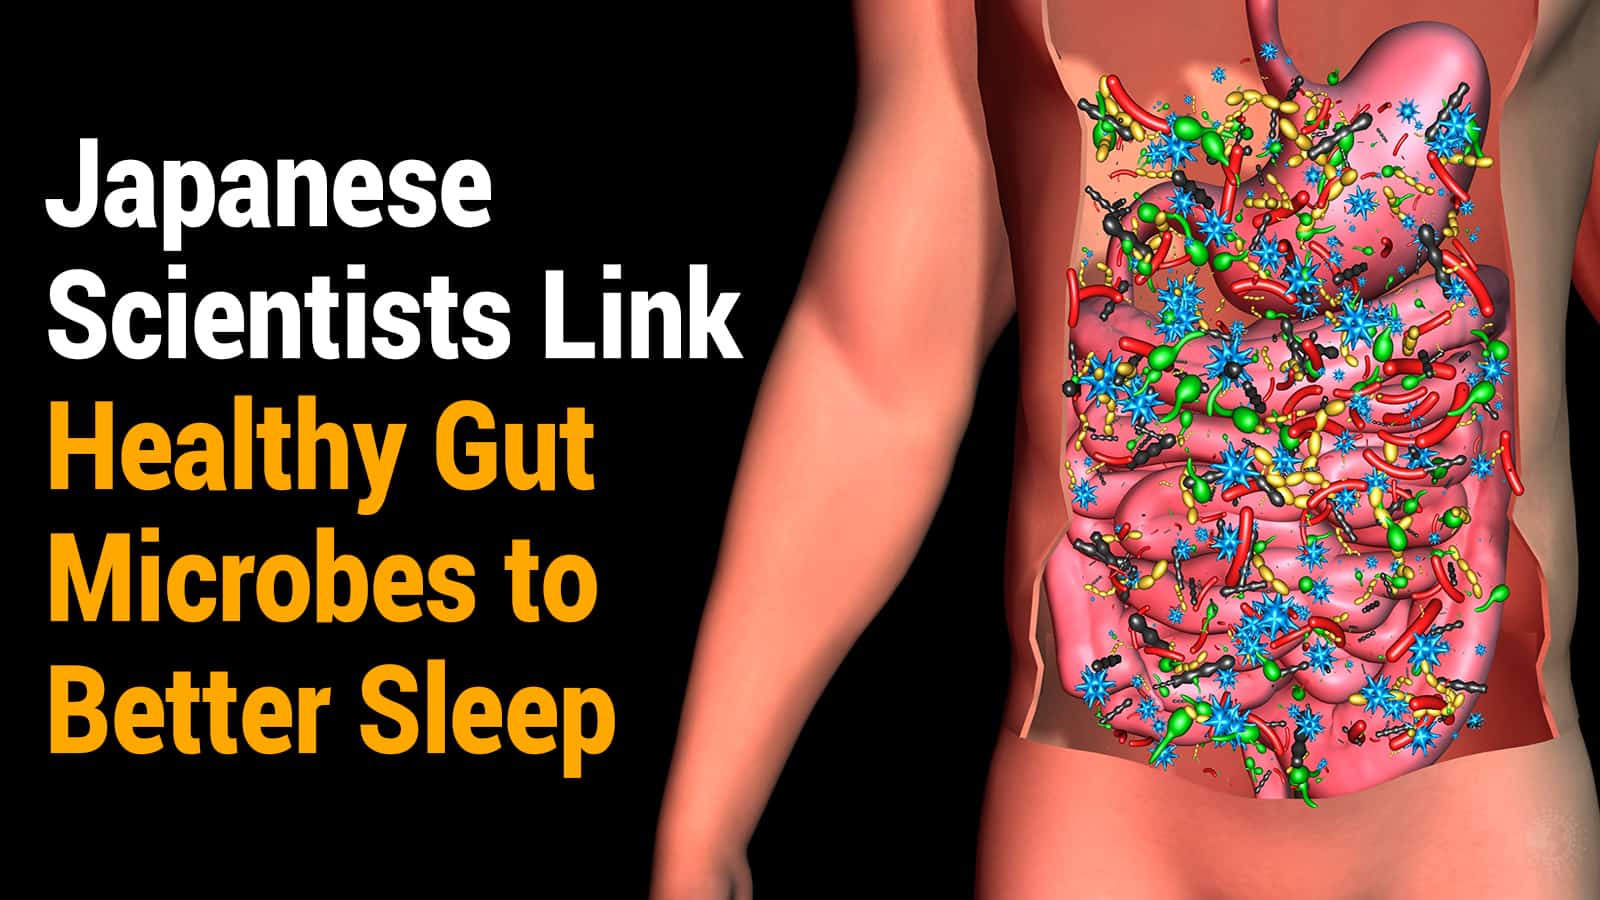 Japanese Scientists Link Healthy Gut Microbes to Better Sleep